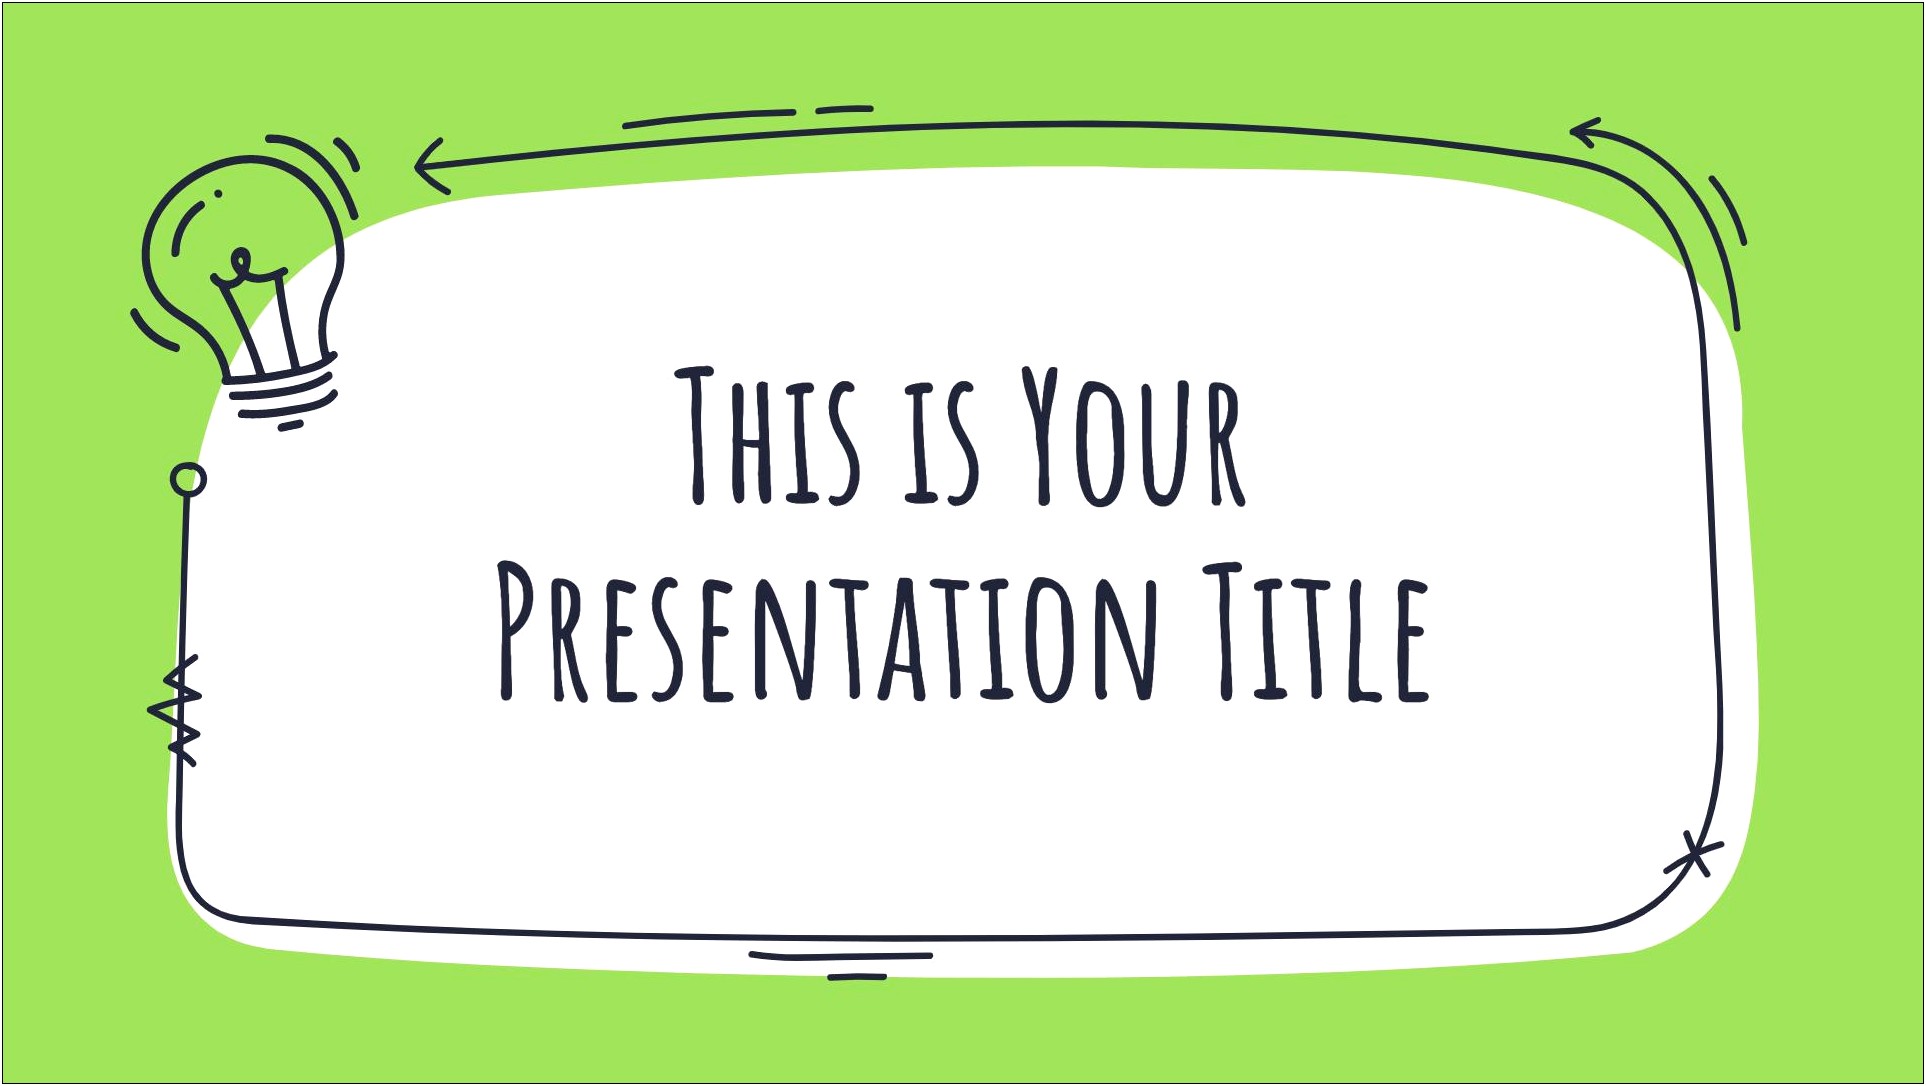 Go Green Powerpoint Templates Free Download